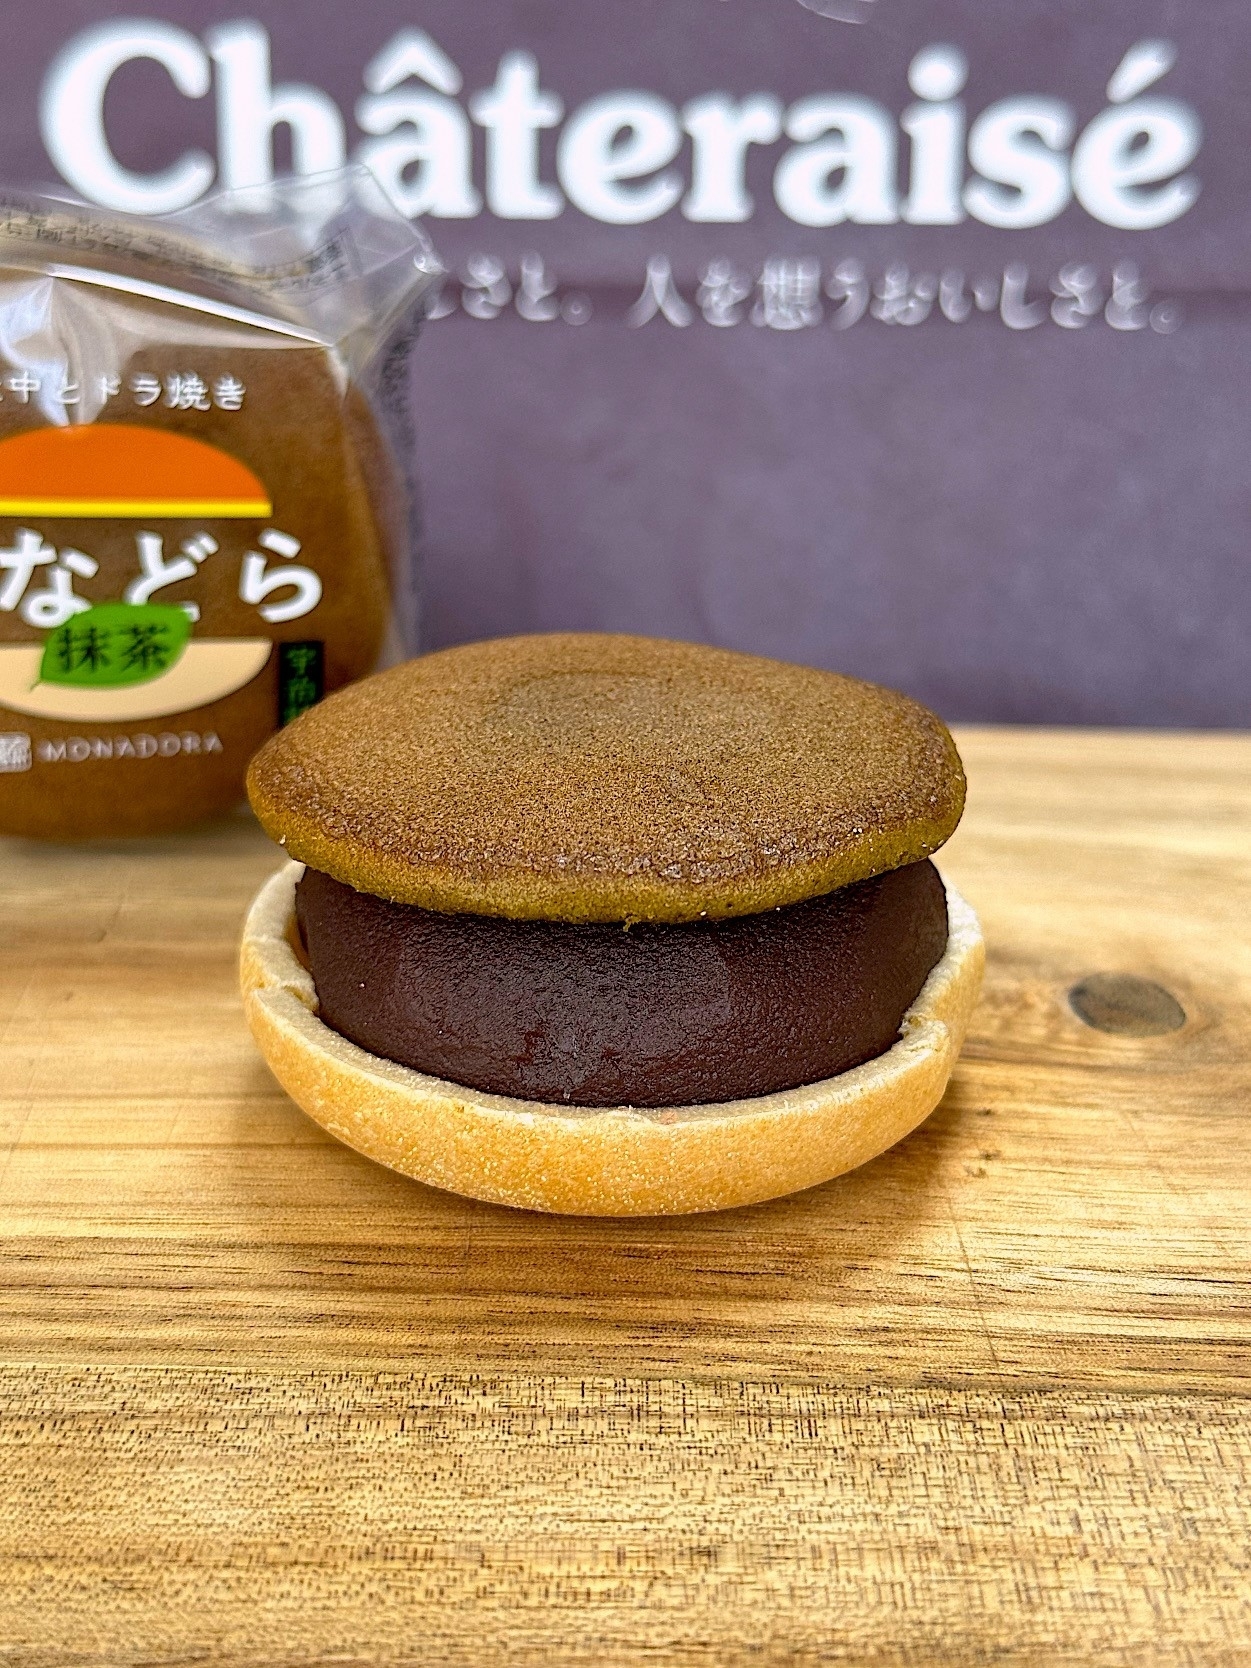 Japanese dessert dorayaki from Chateraise with red bean filling on a wooden surface, packaging in background